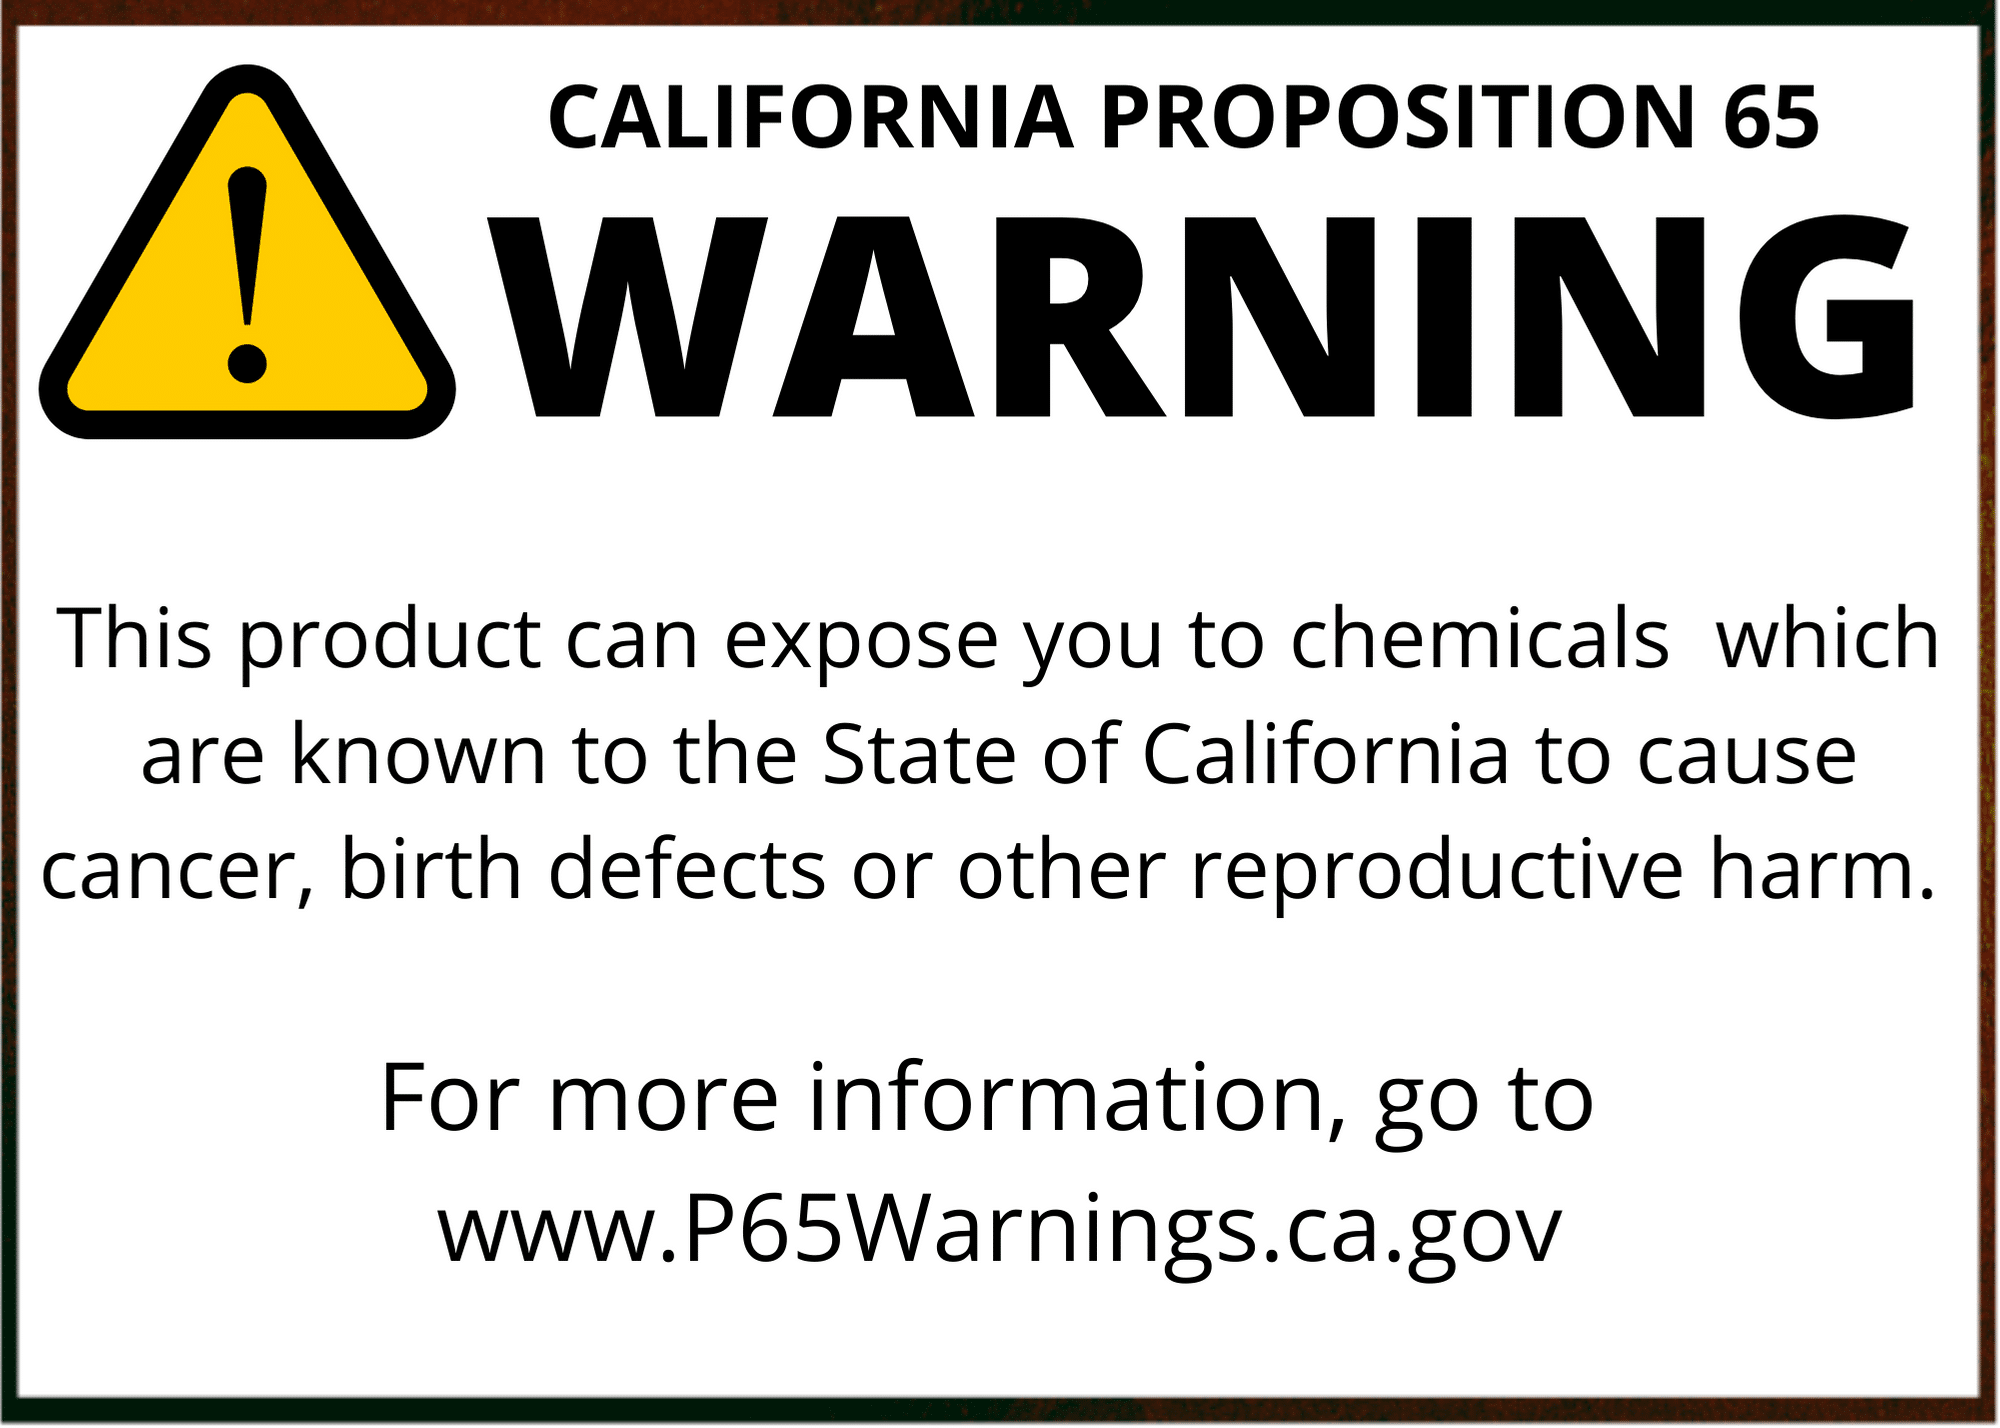 What is Prop 65?